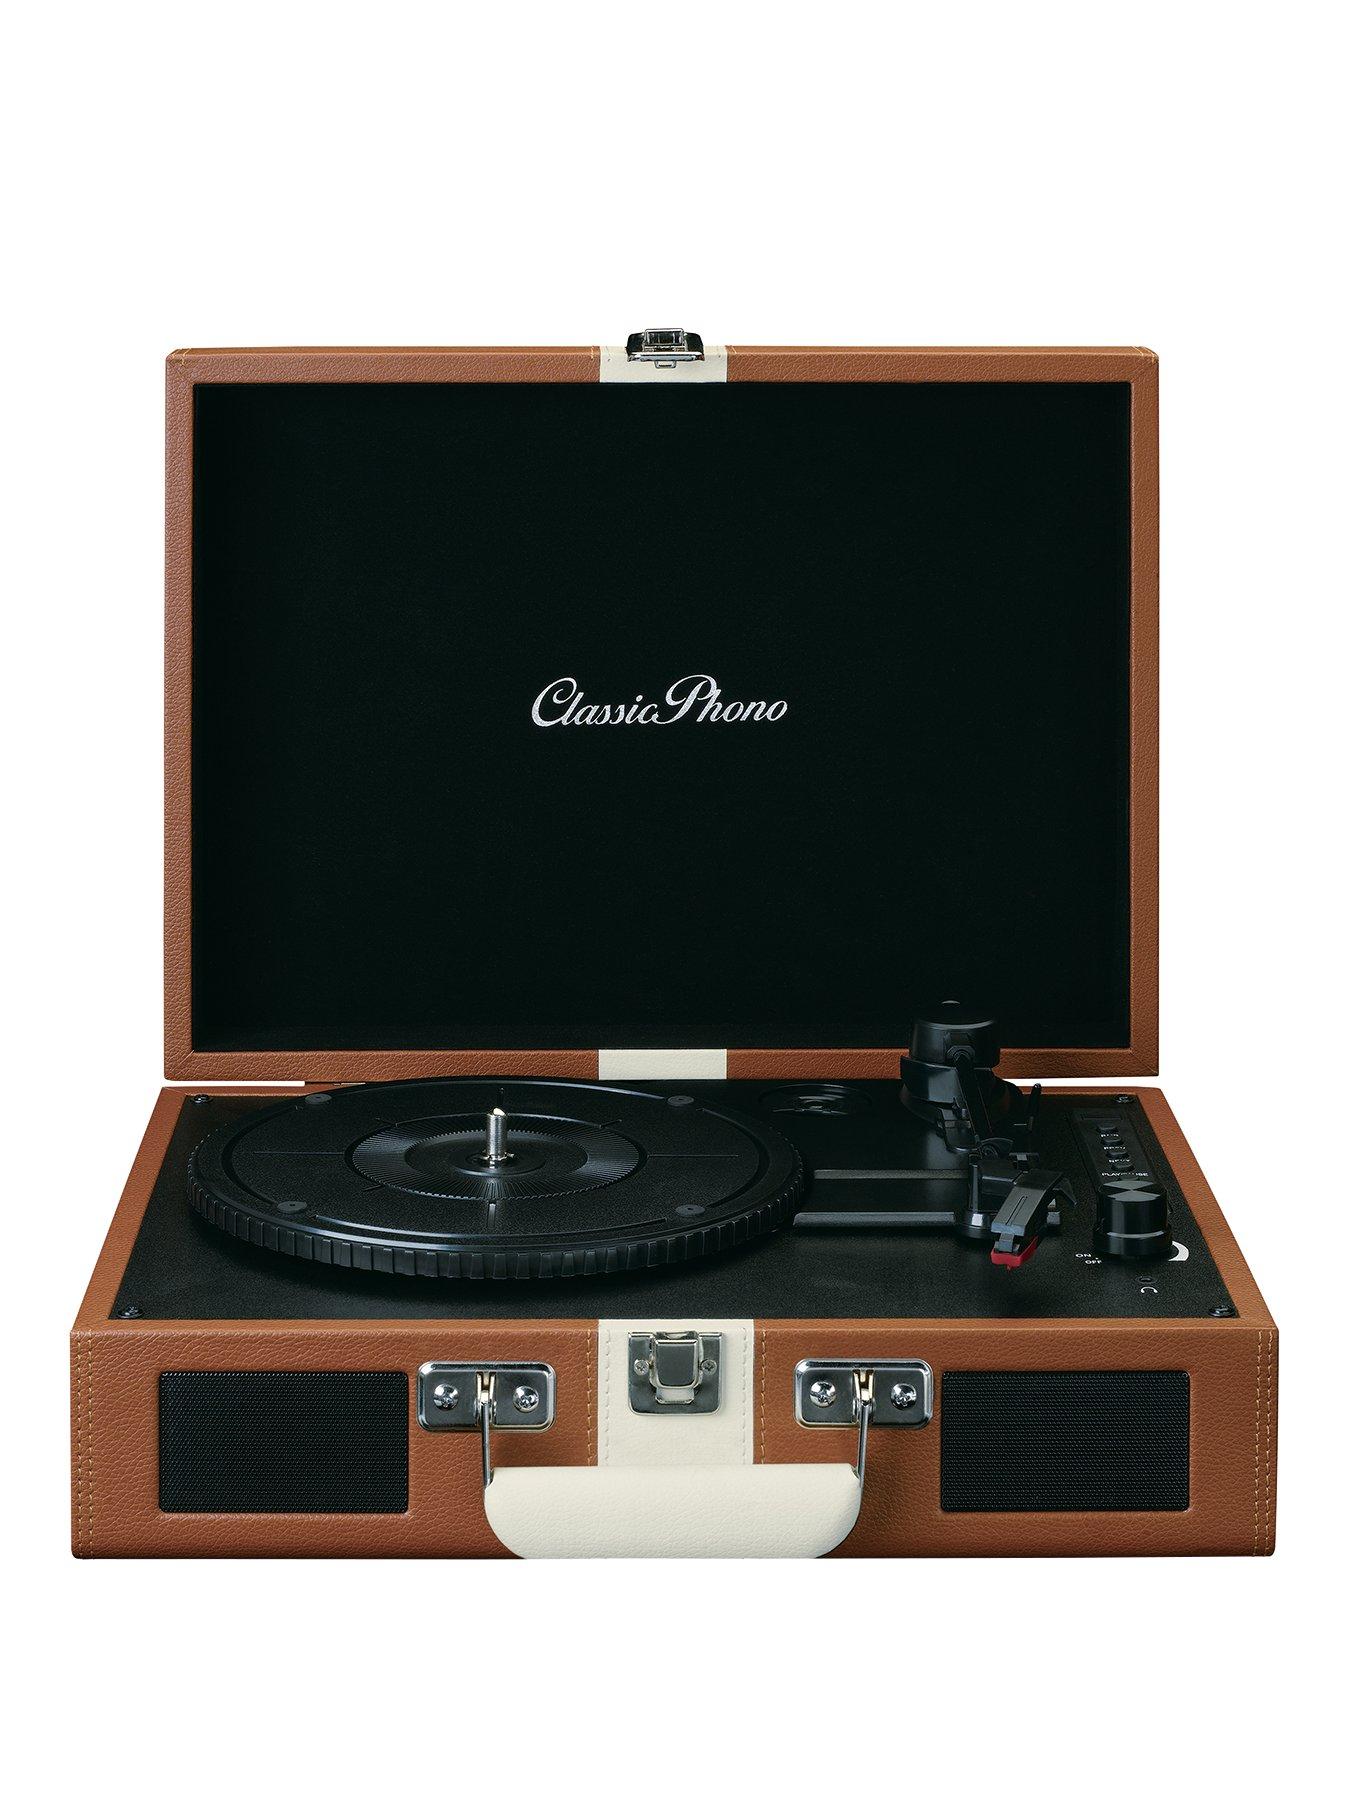 TT-Classic Light Record Player, Smooth-running belt drive, Bluetooth, 3  speeds: 33 / 45 / 78 rpm, Integrated stereo speakers, AUX input, RCA  line out, Dust cover, LED illumination